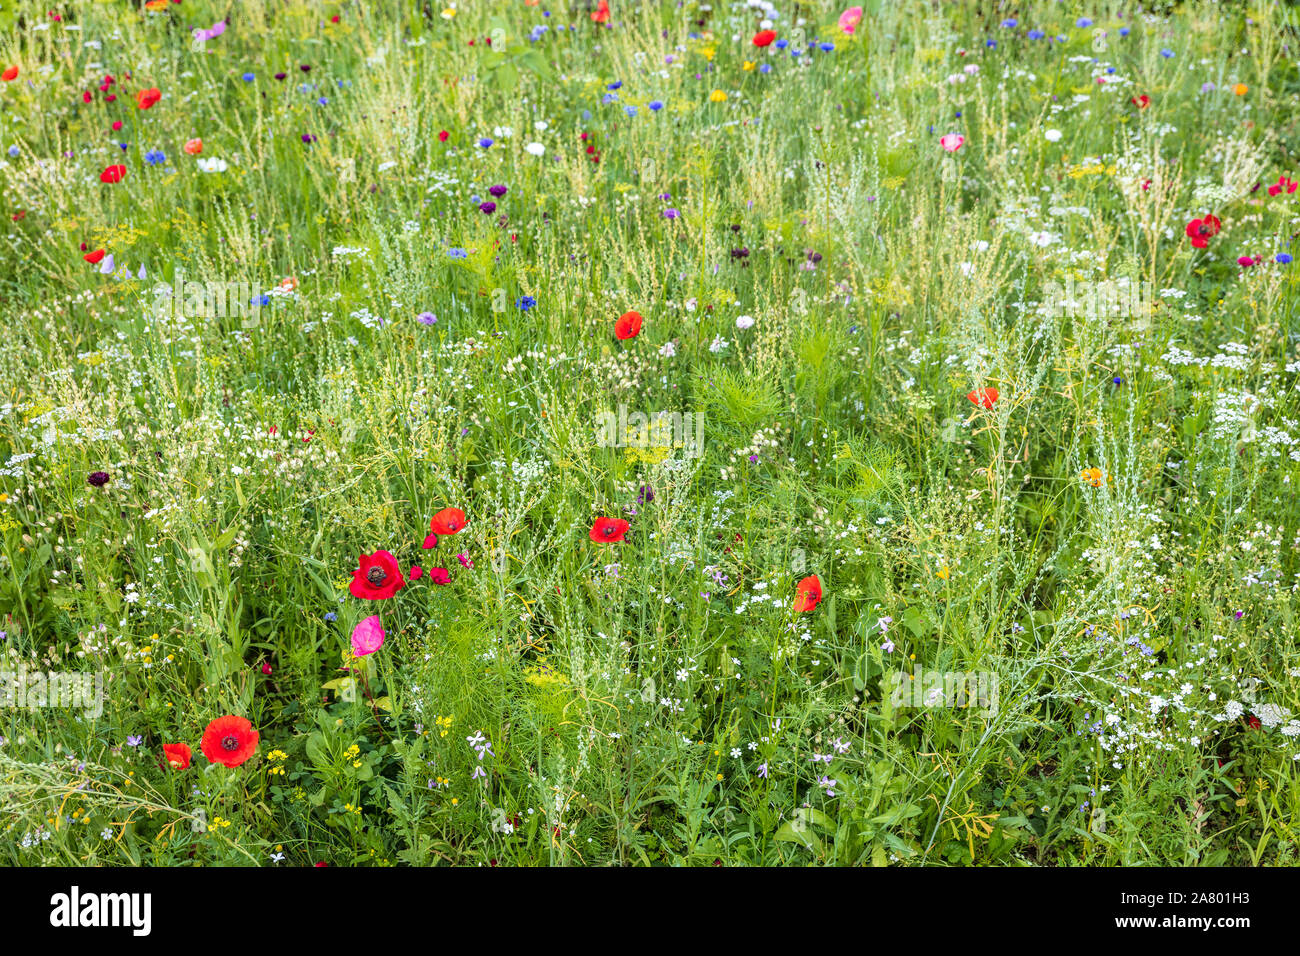 wild and unspoiled flower meadow, natural conservation for insects and wildlife animals Stock Photo